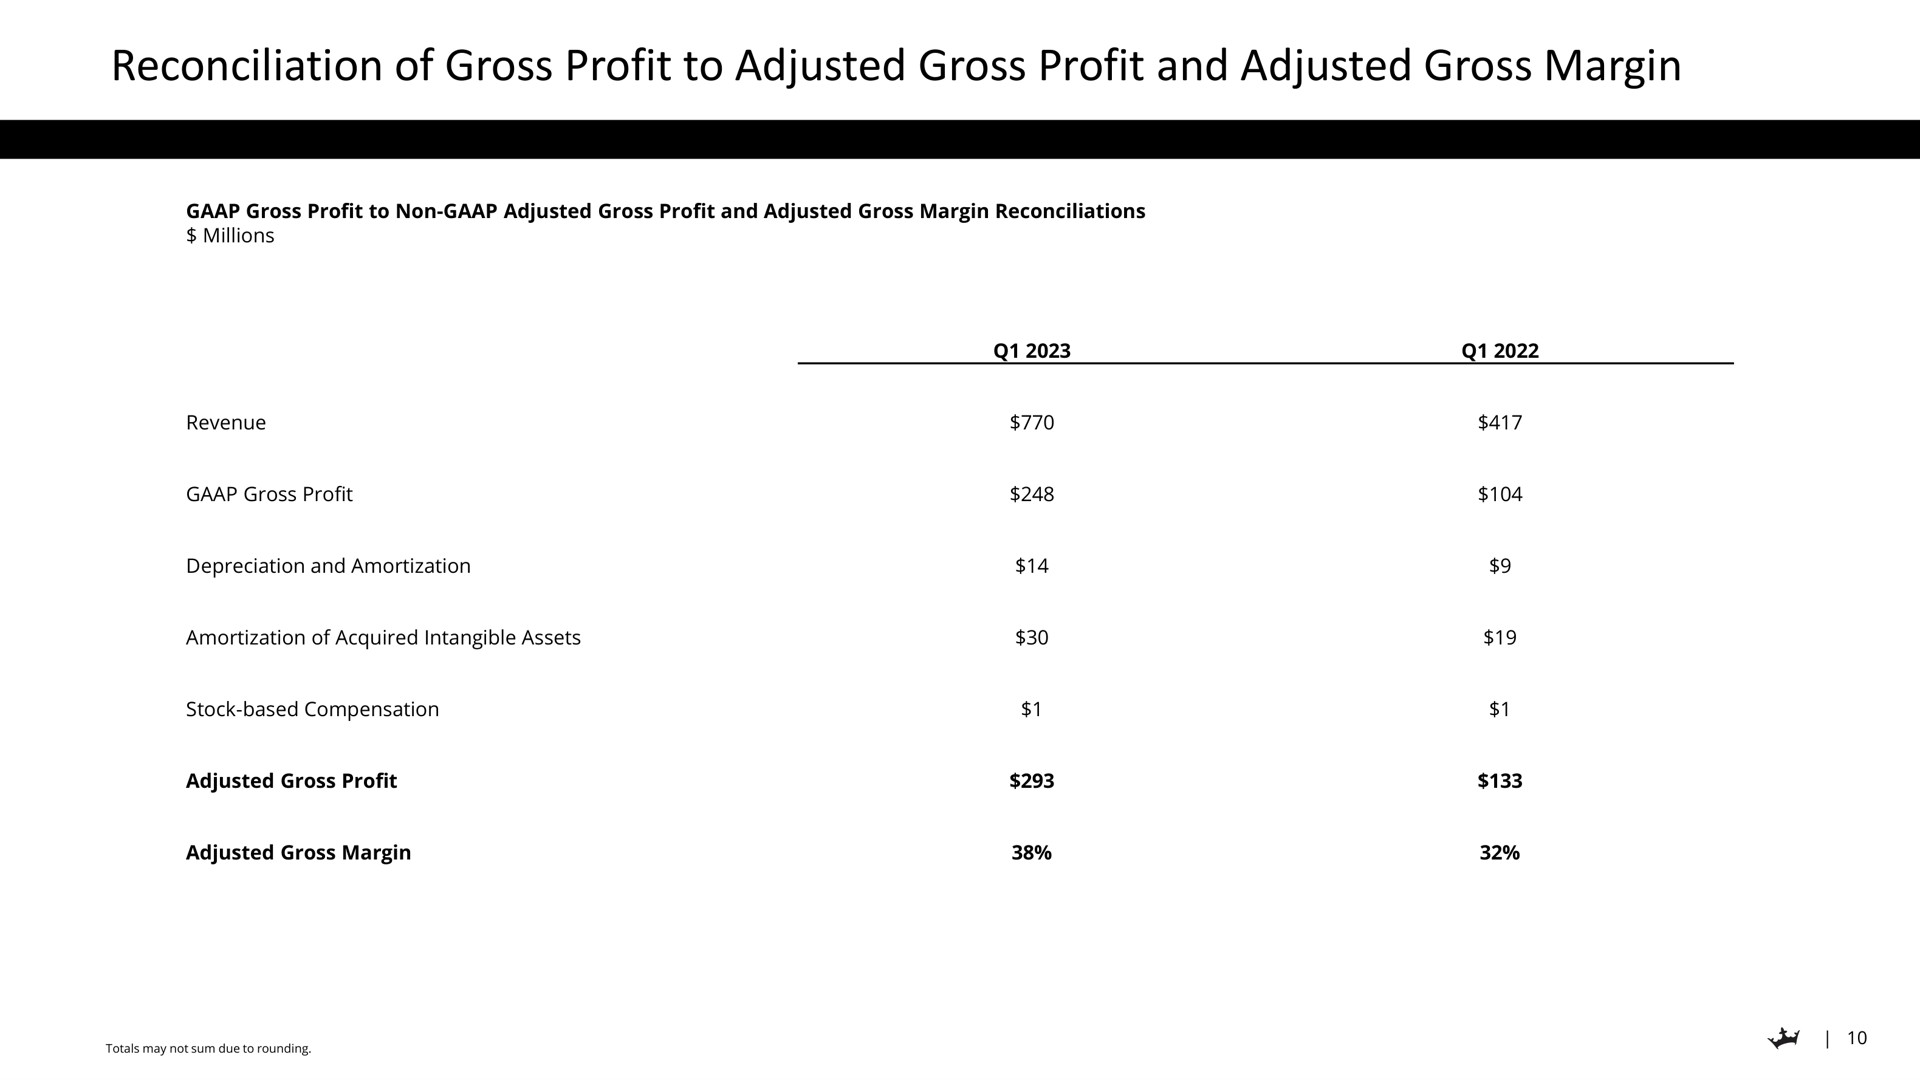 reconciliation of gross profit to adjusted gross profit and adjusted gross margin | DraftKings